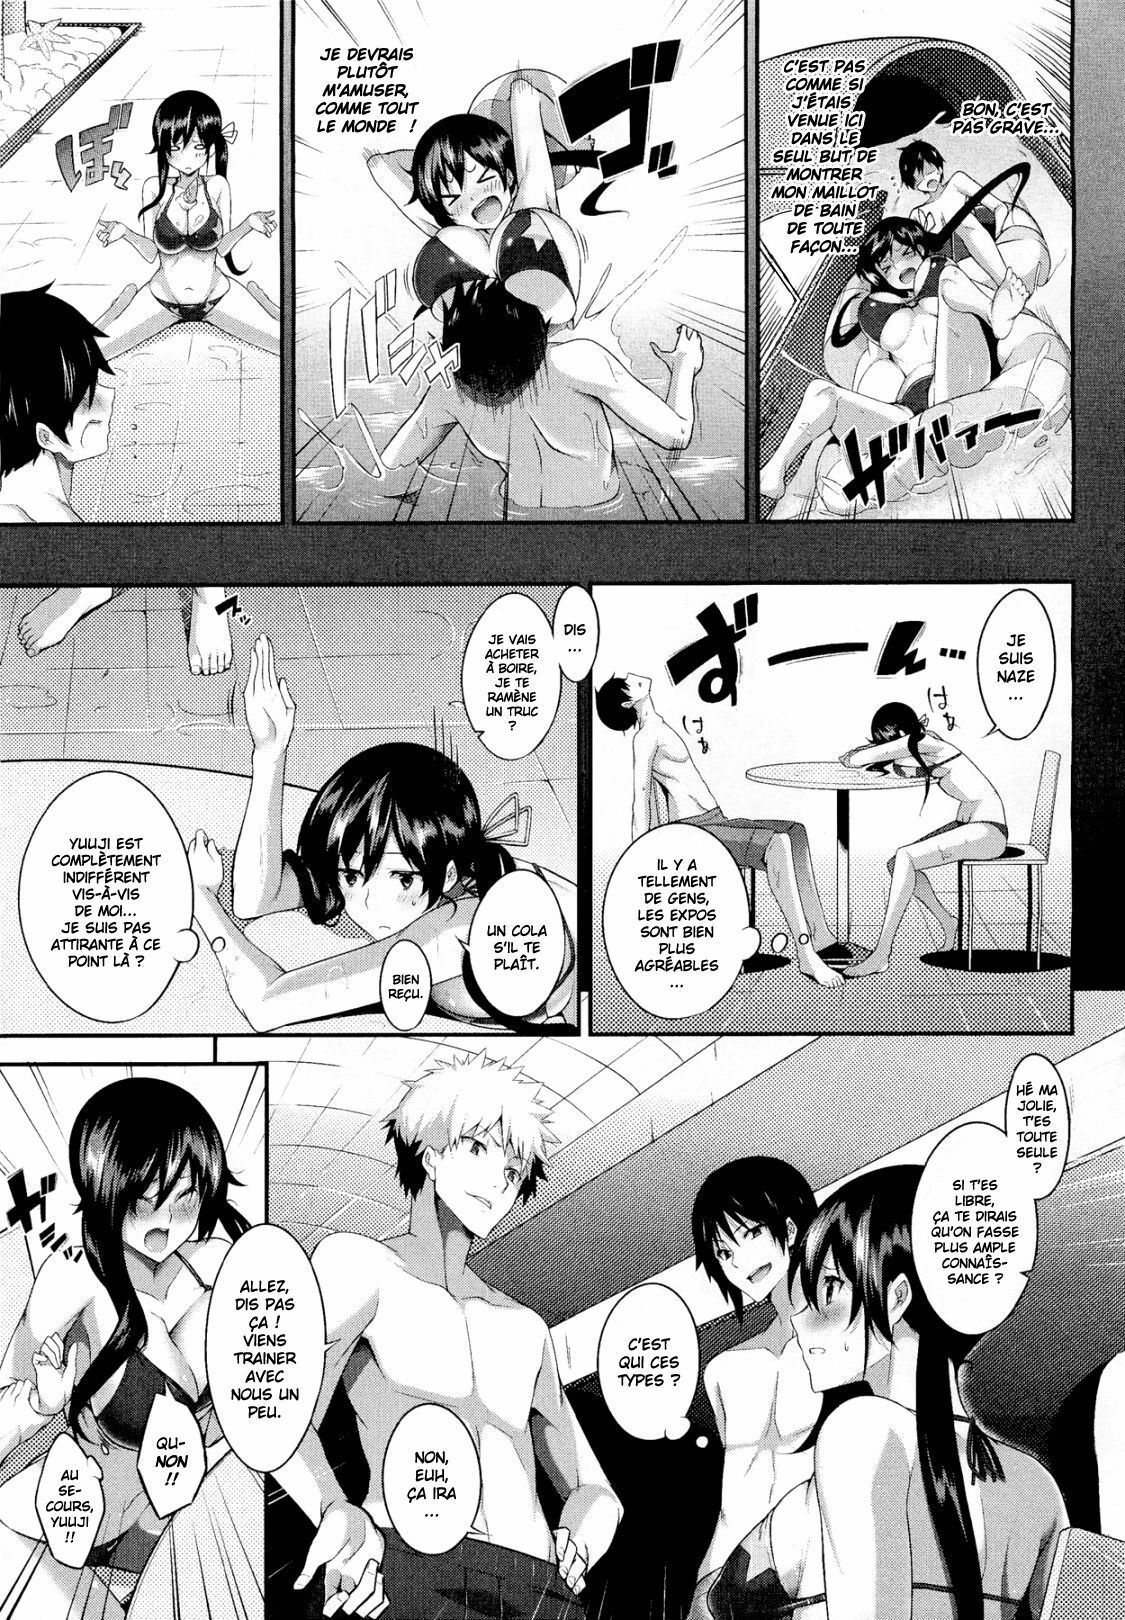 [Nanao] Come With Me (COMIC MEGASTORE 2012-02) [French] {HFR} page 5 full